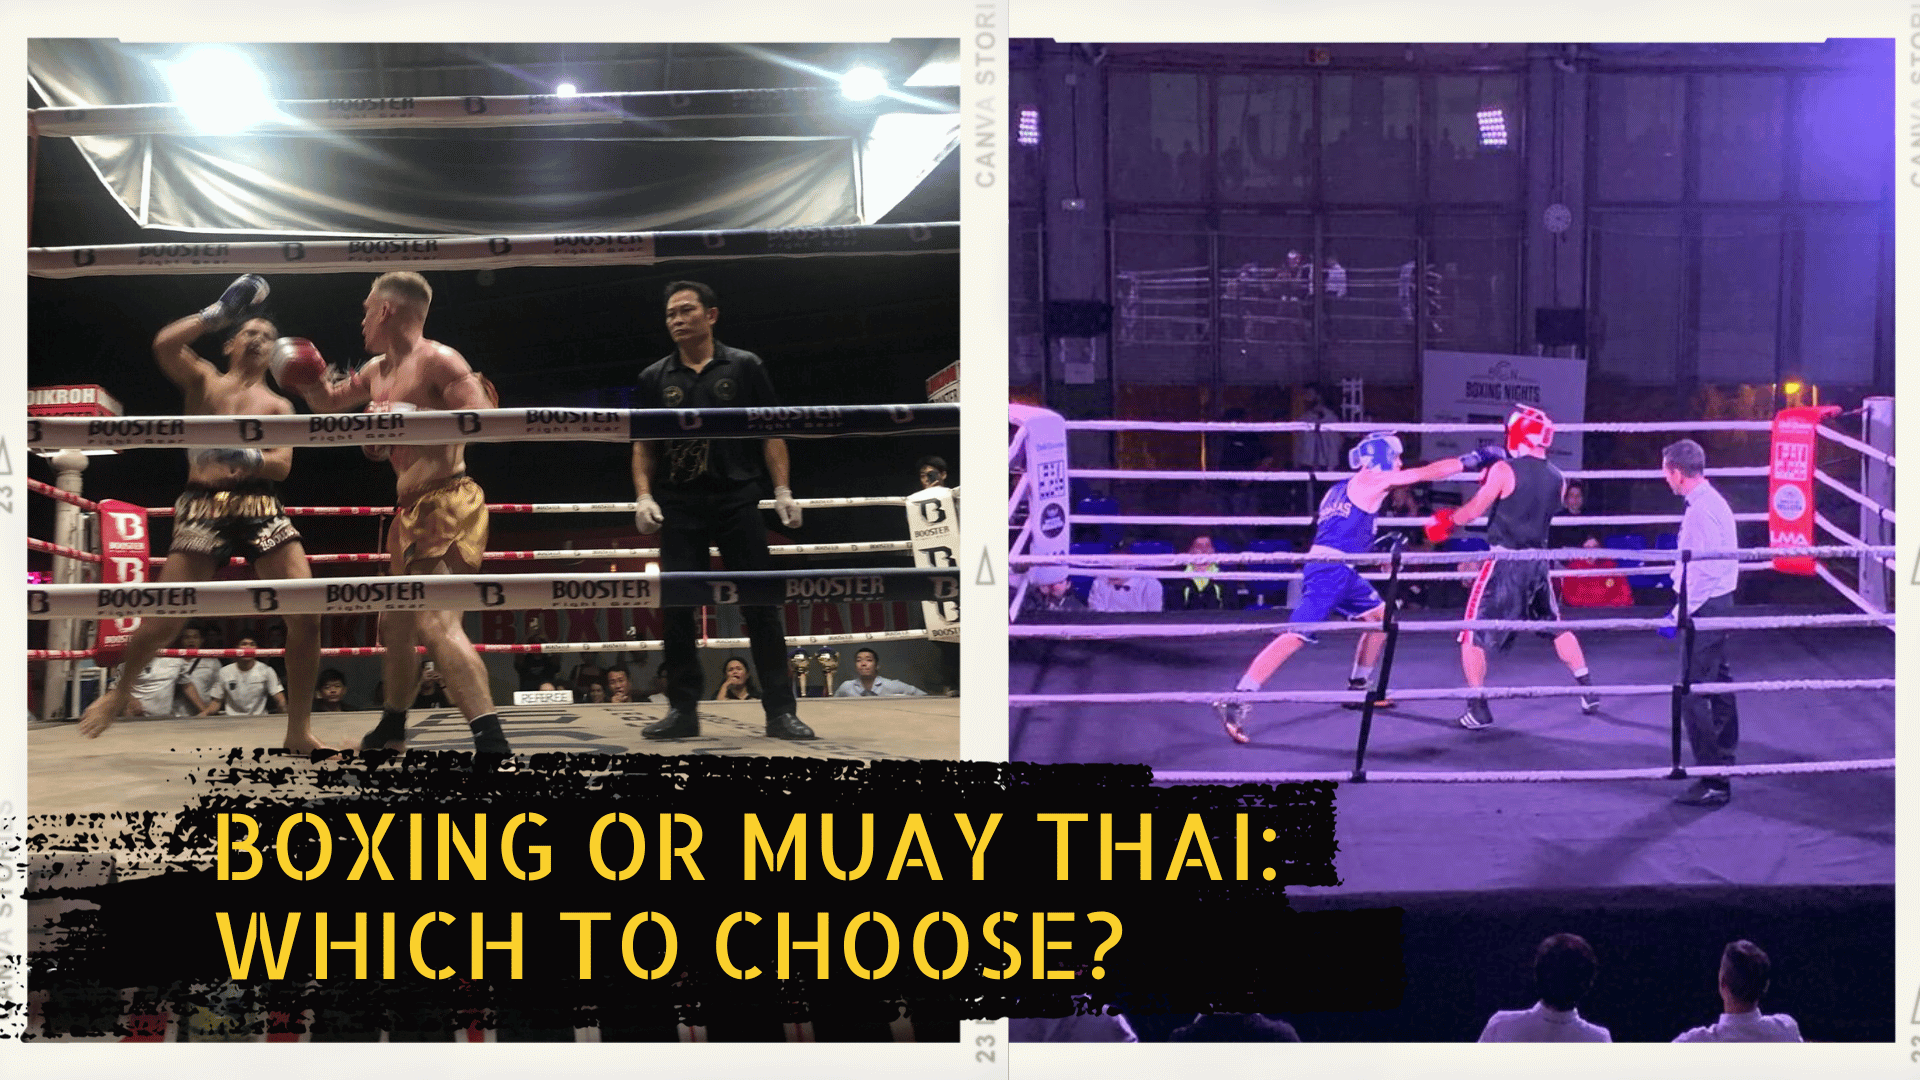 A boxing match and a muay thai fight